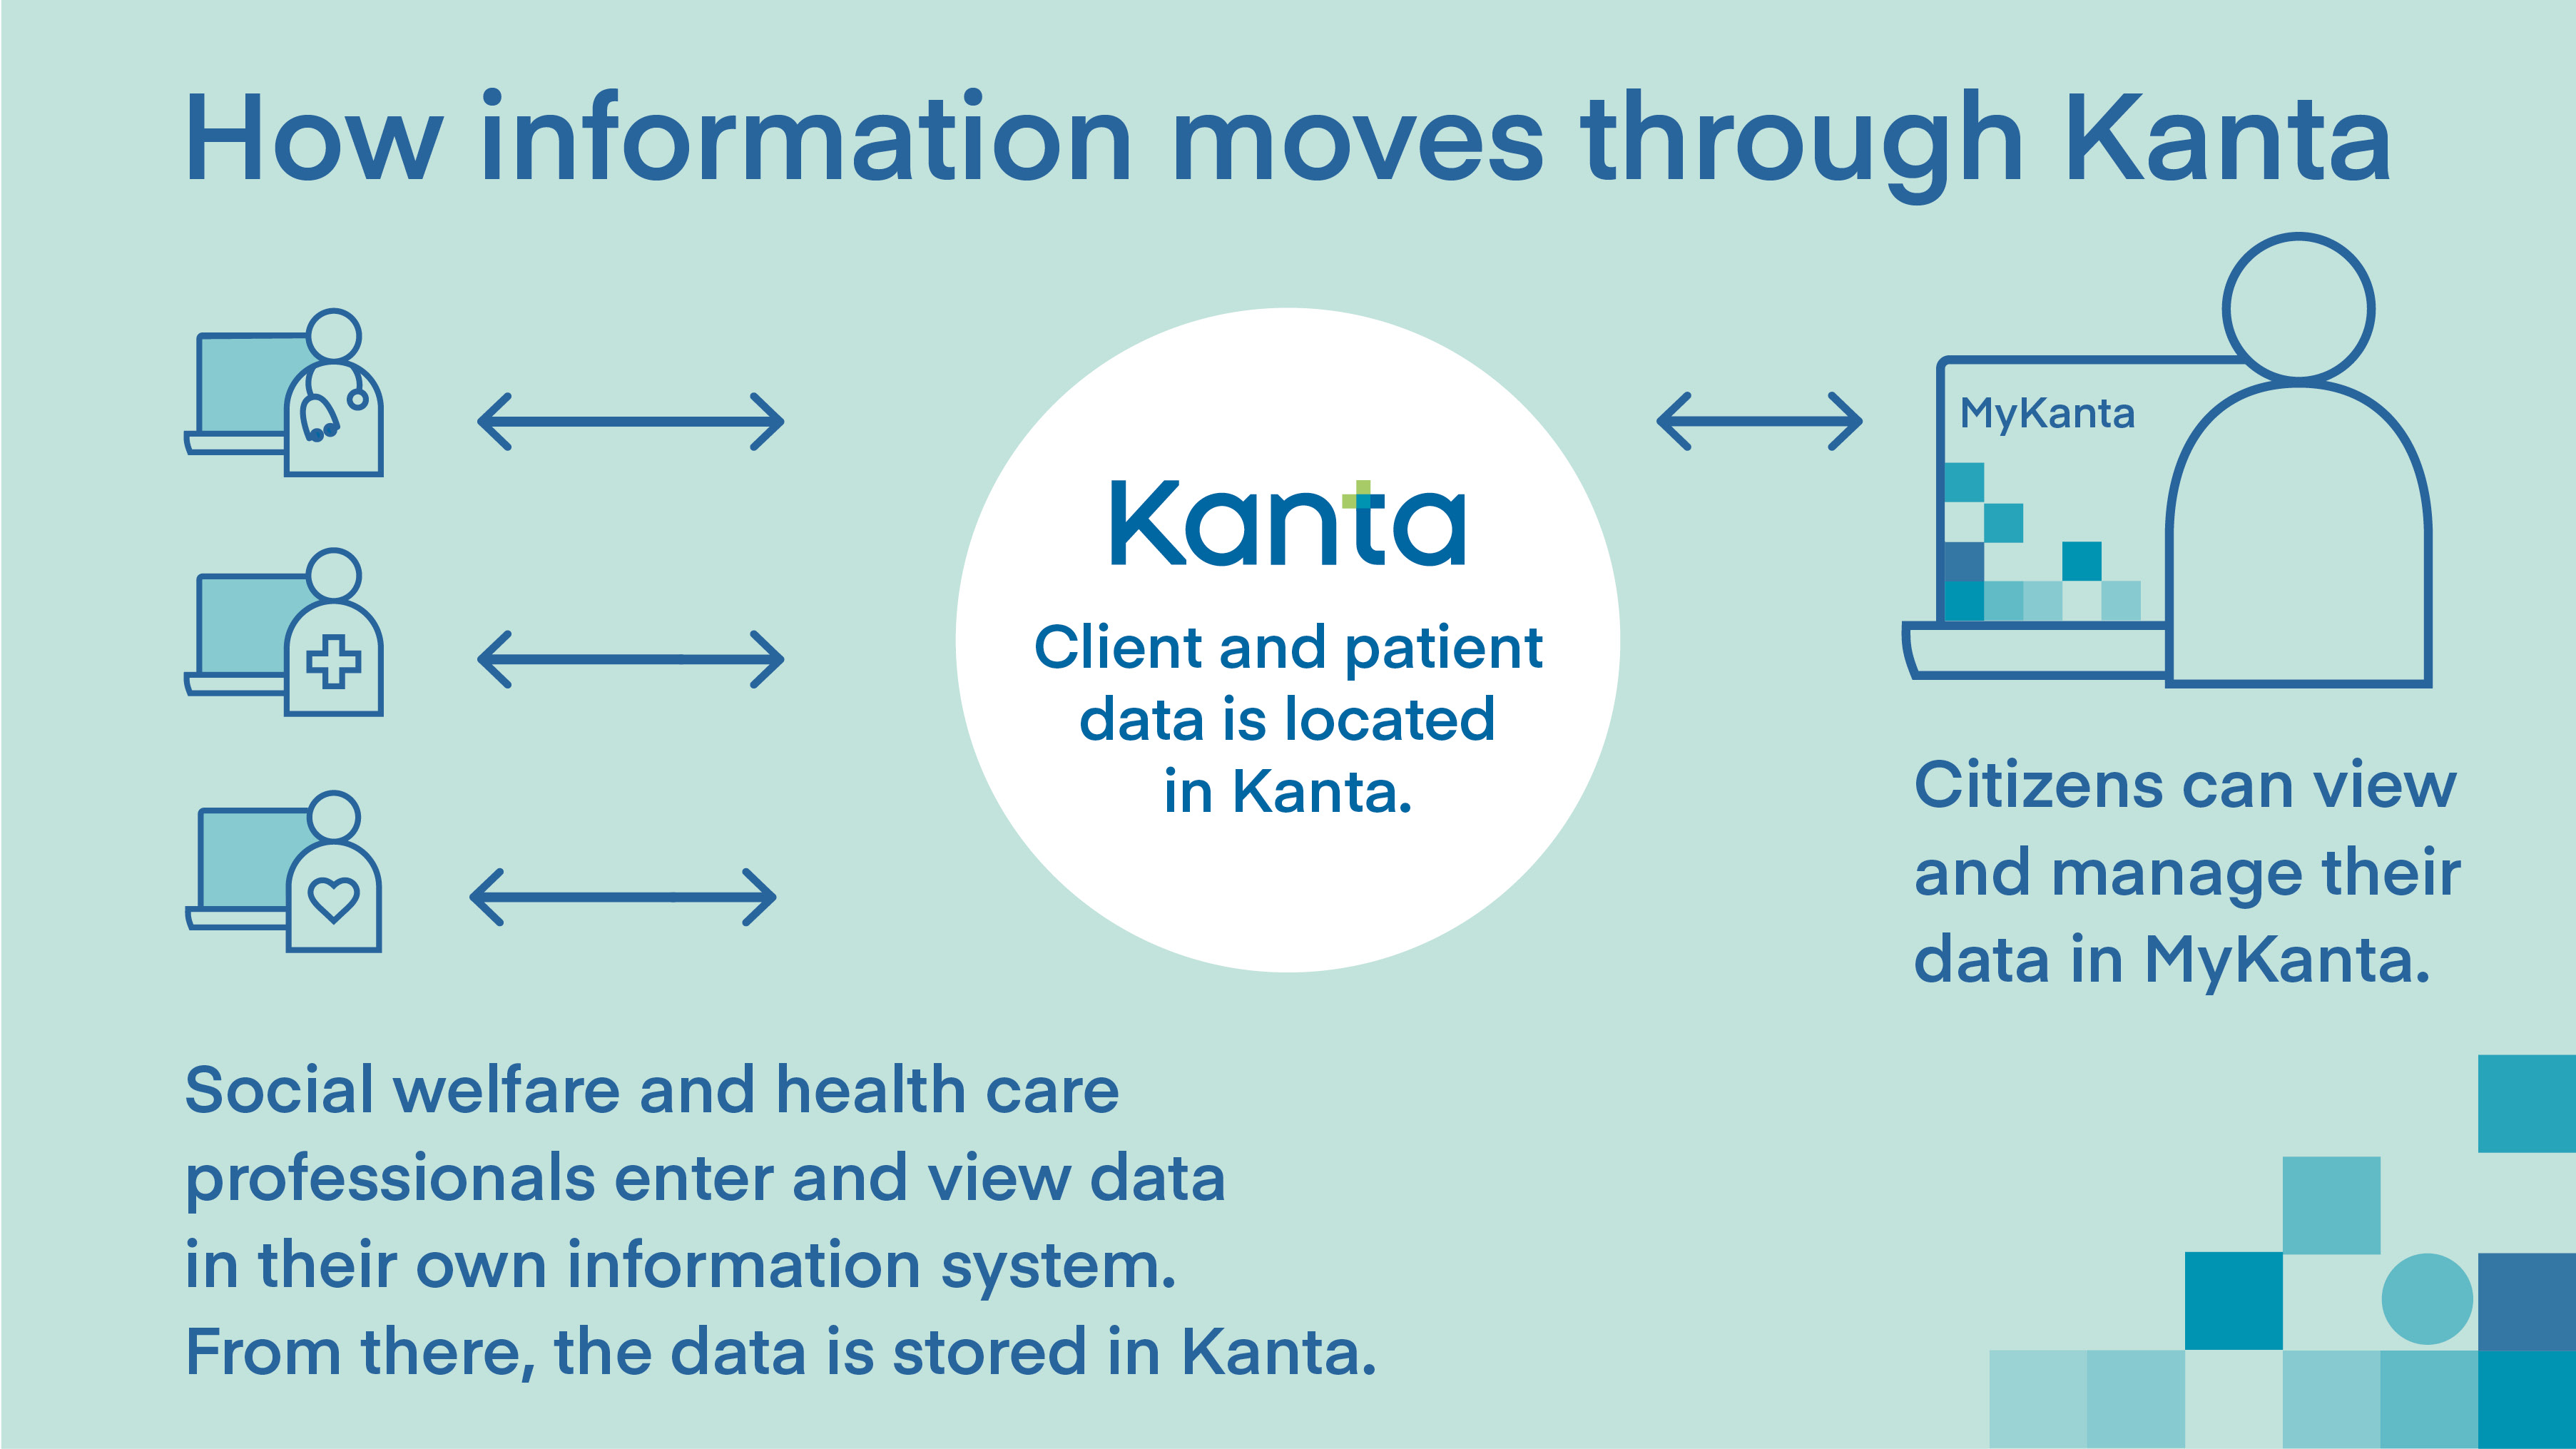 HowAn infographic of how information moves in Kanta. 1. Social welfare and health care professionals enter and view data in their own information system. From there, the data is stored in Kanta. 2. Client and patient data is located in Kanta. 3. Citizens can view and manage their data in MyKanta.